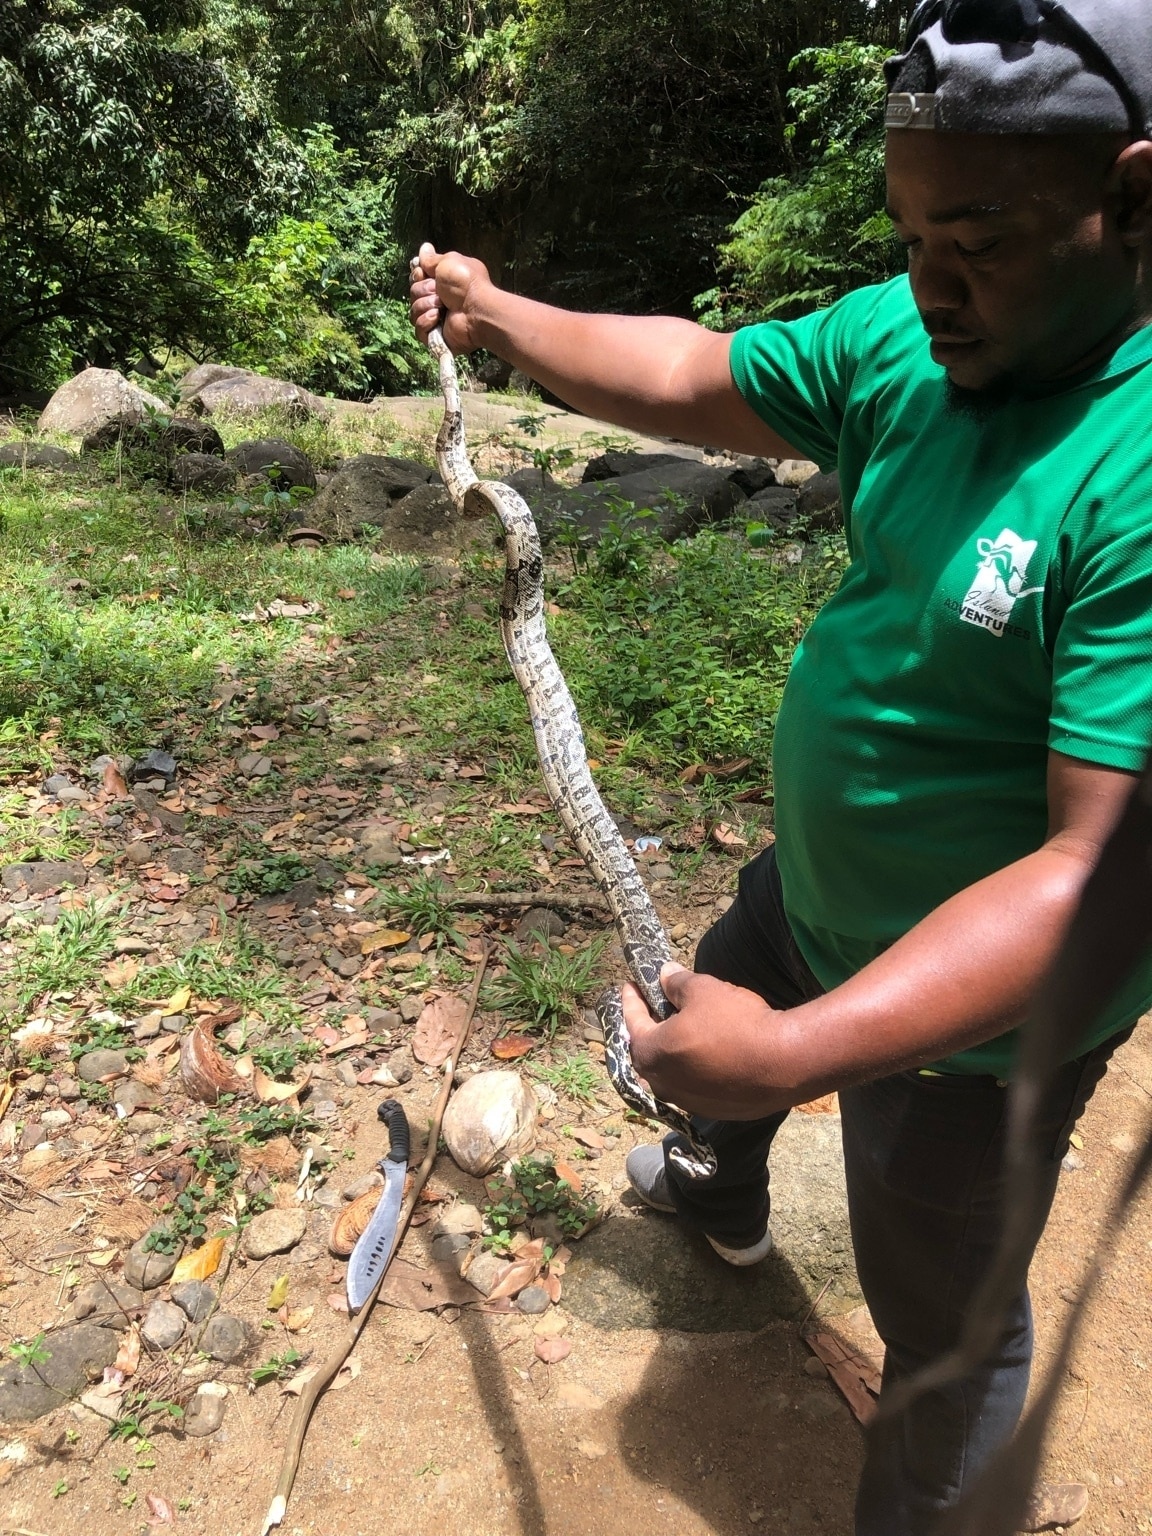 Our guide who took us Ziplining stopped to show us some other local area highlights and took us to an amazing waterfall and found a Boa Constrictor.  Picked it up as if it was nothing Haha what a brave man. Boas are found all over the island. #SaintLucia #IslandLife #Carribean #WestIndies #Island #Snake #Boa